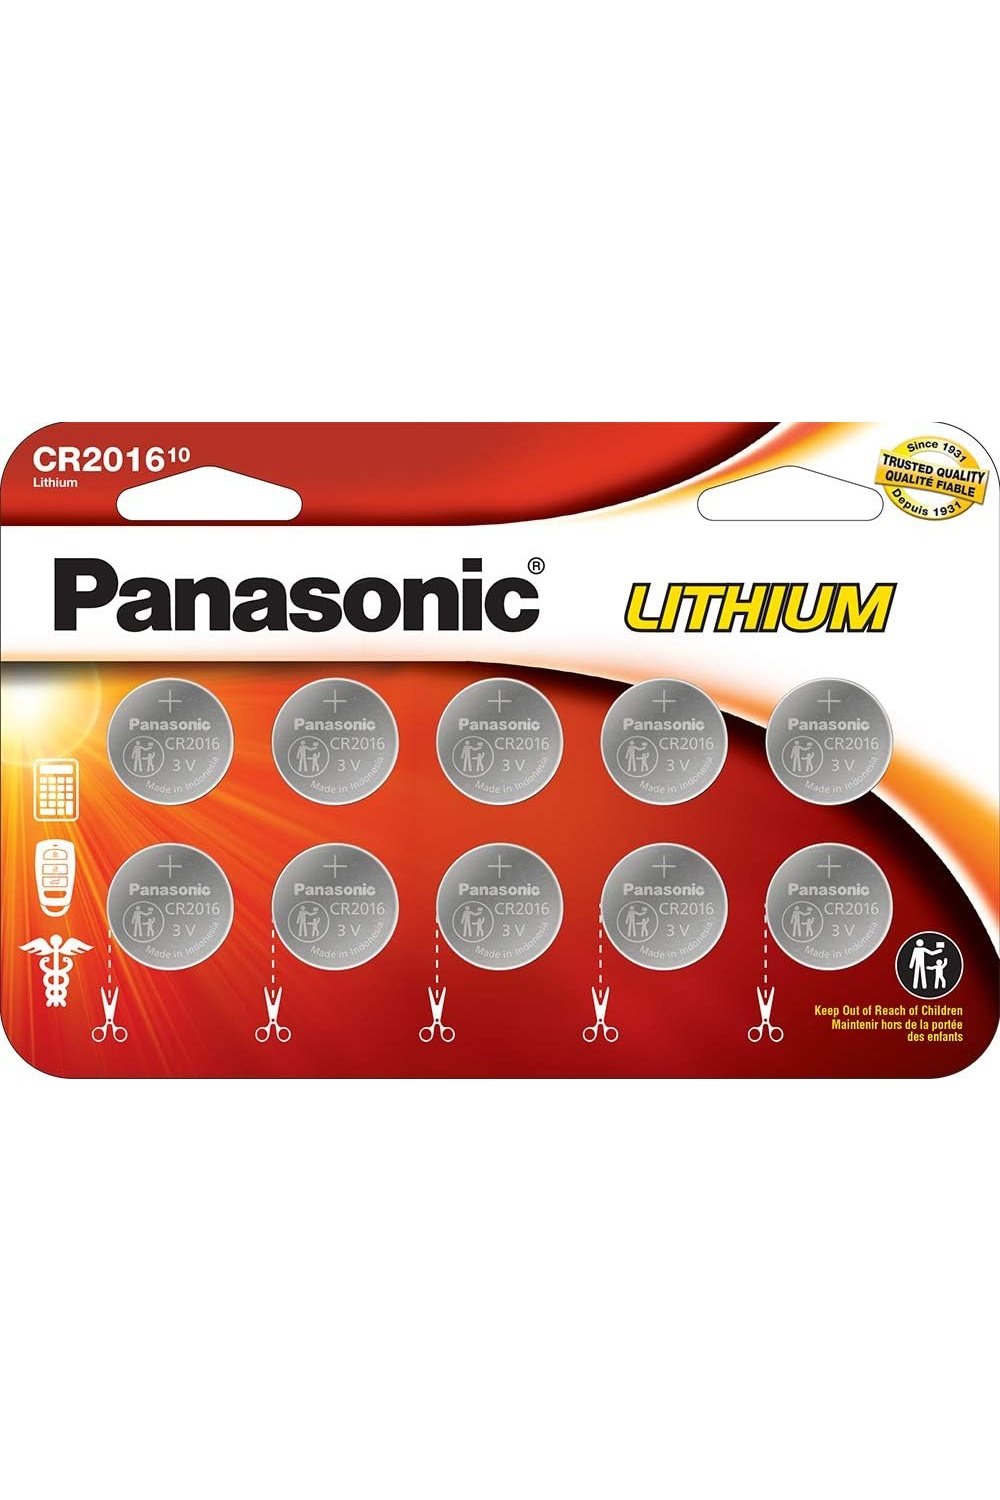 Panasonic CR2016 3.0 Volt Long Lasting Lithium Coin Cell Batteries in Child Resistant, Standards Based Packaging - 12 Count